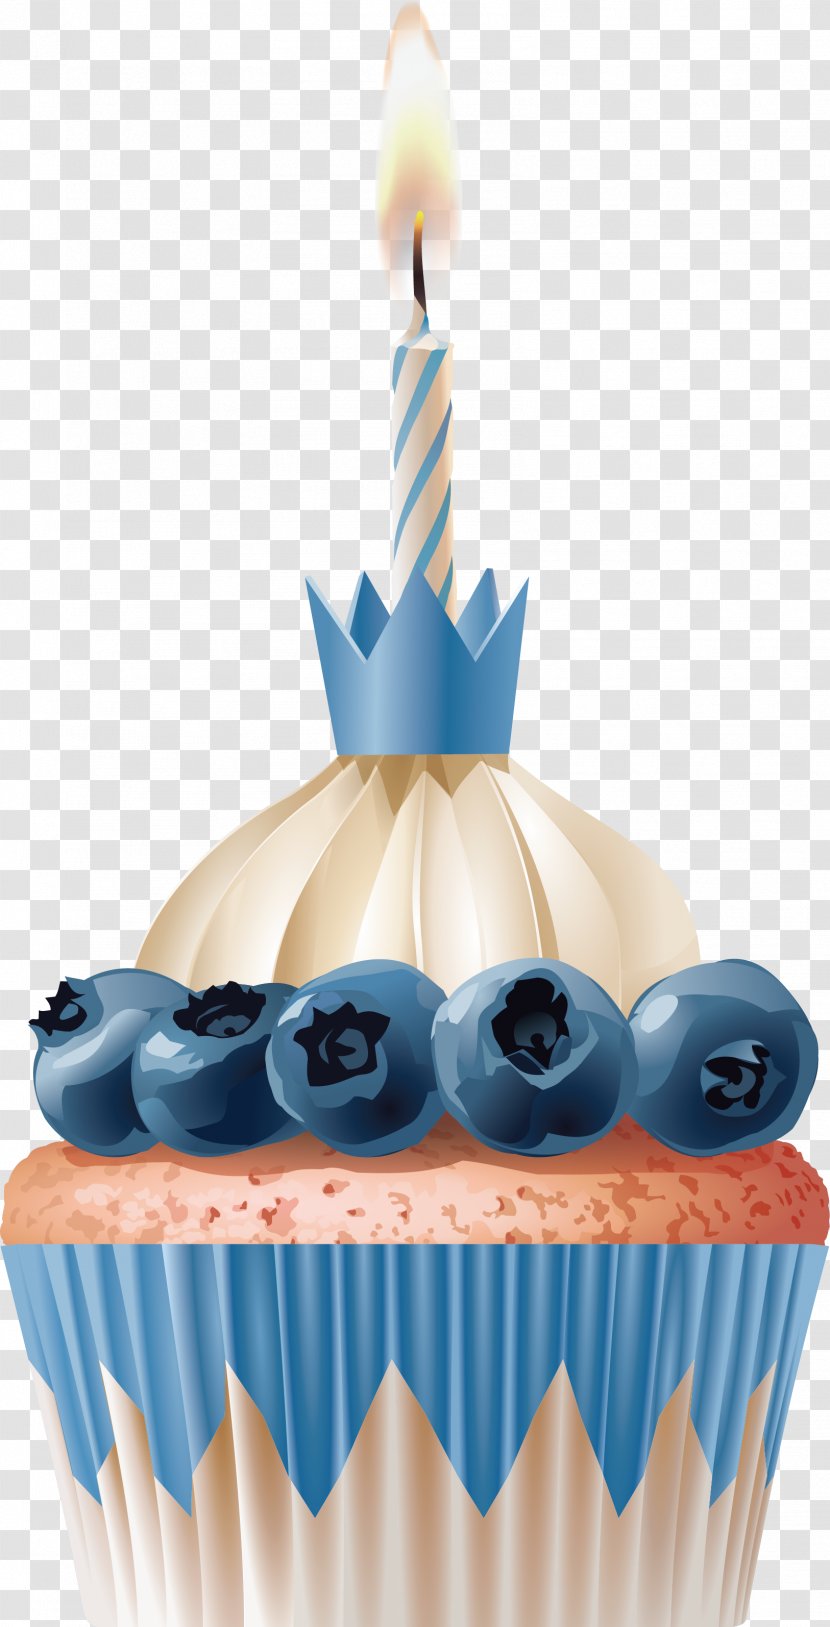 Cupcake Birthday Cake Bakery Muffin Madeleine - Blueberry Cupcakes Transparent PNG